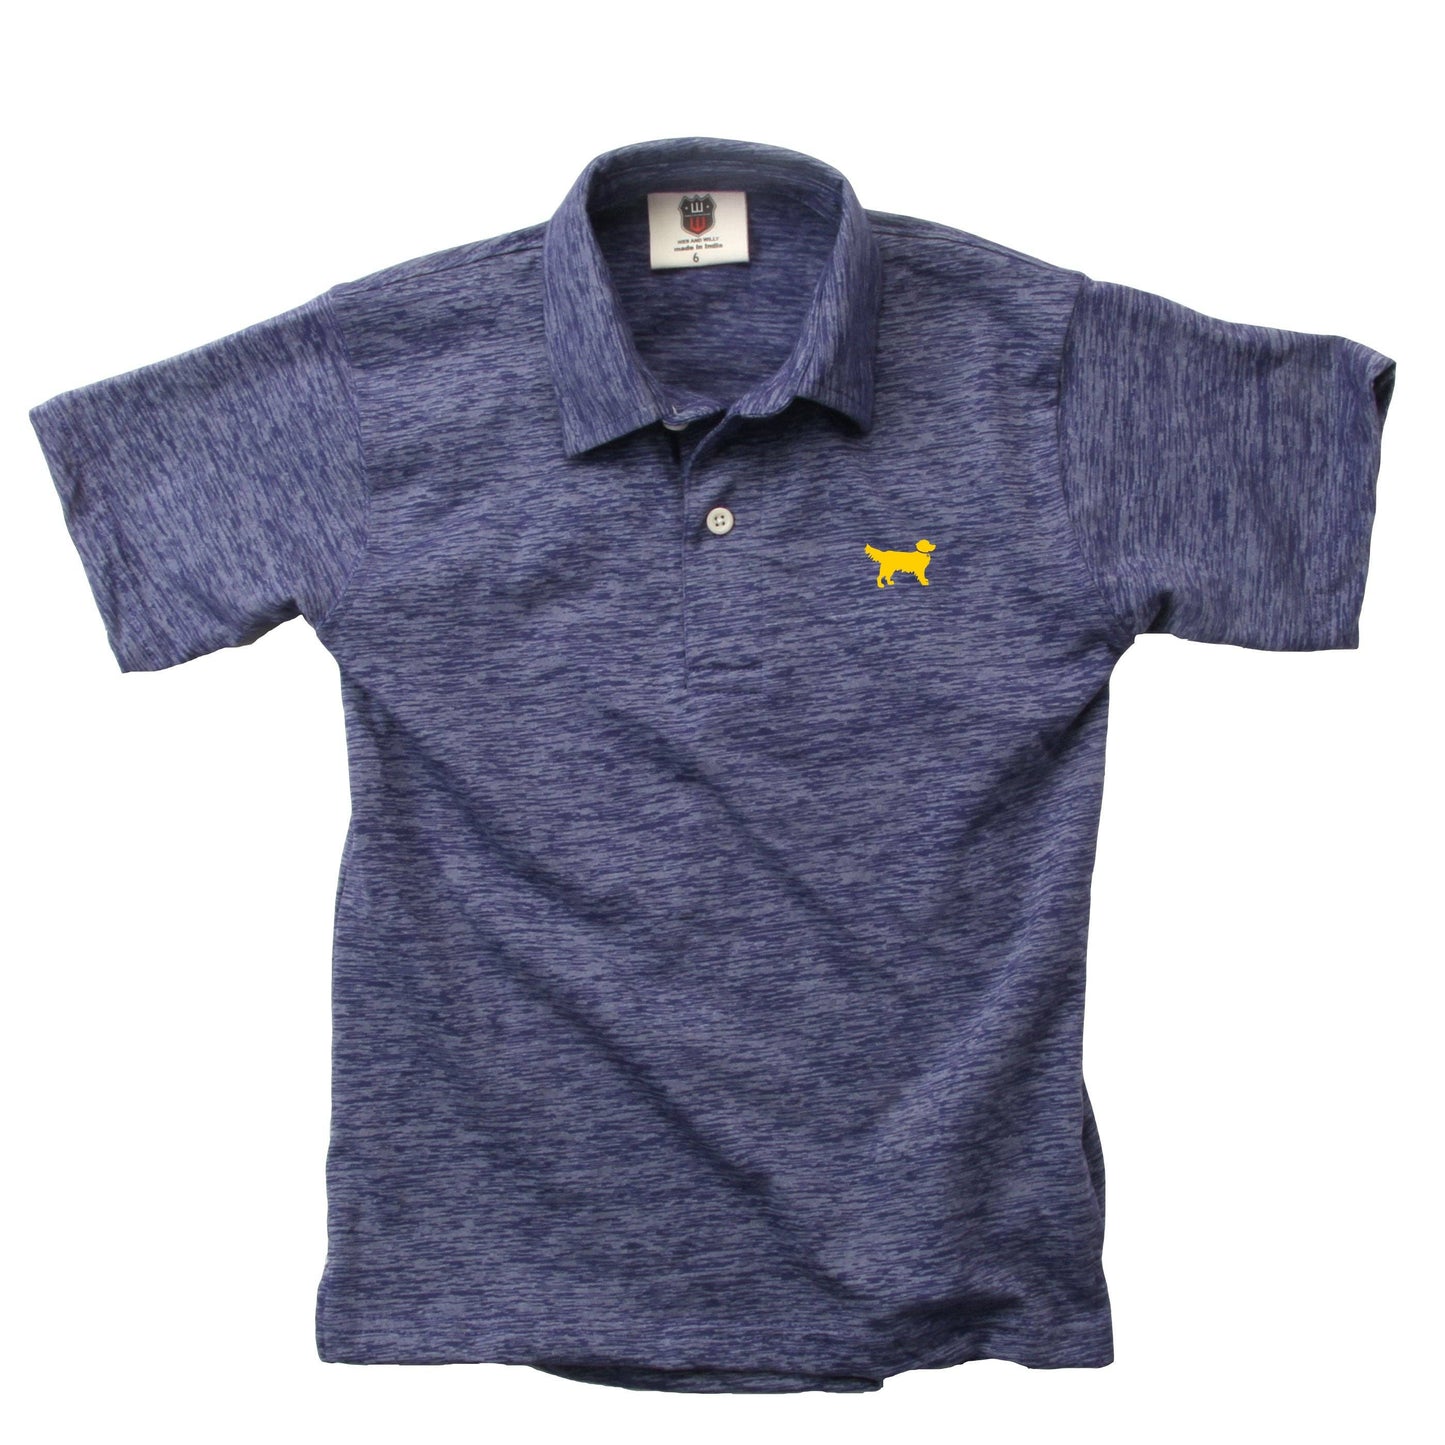 Wes and Willy - Jack Thomas Boys Cloudy Yarn SS Polo: 7 / Orange Crush